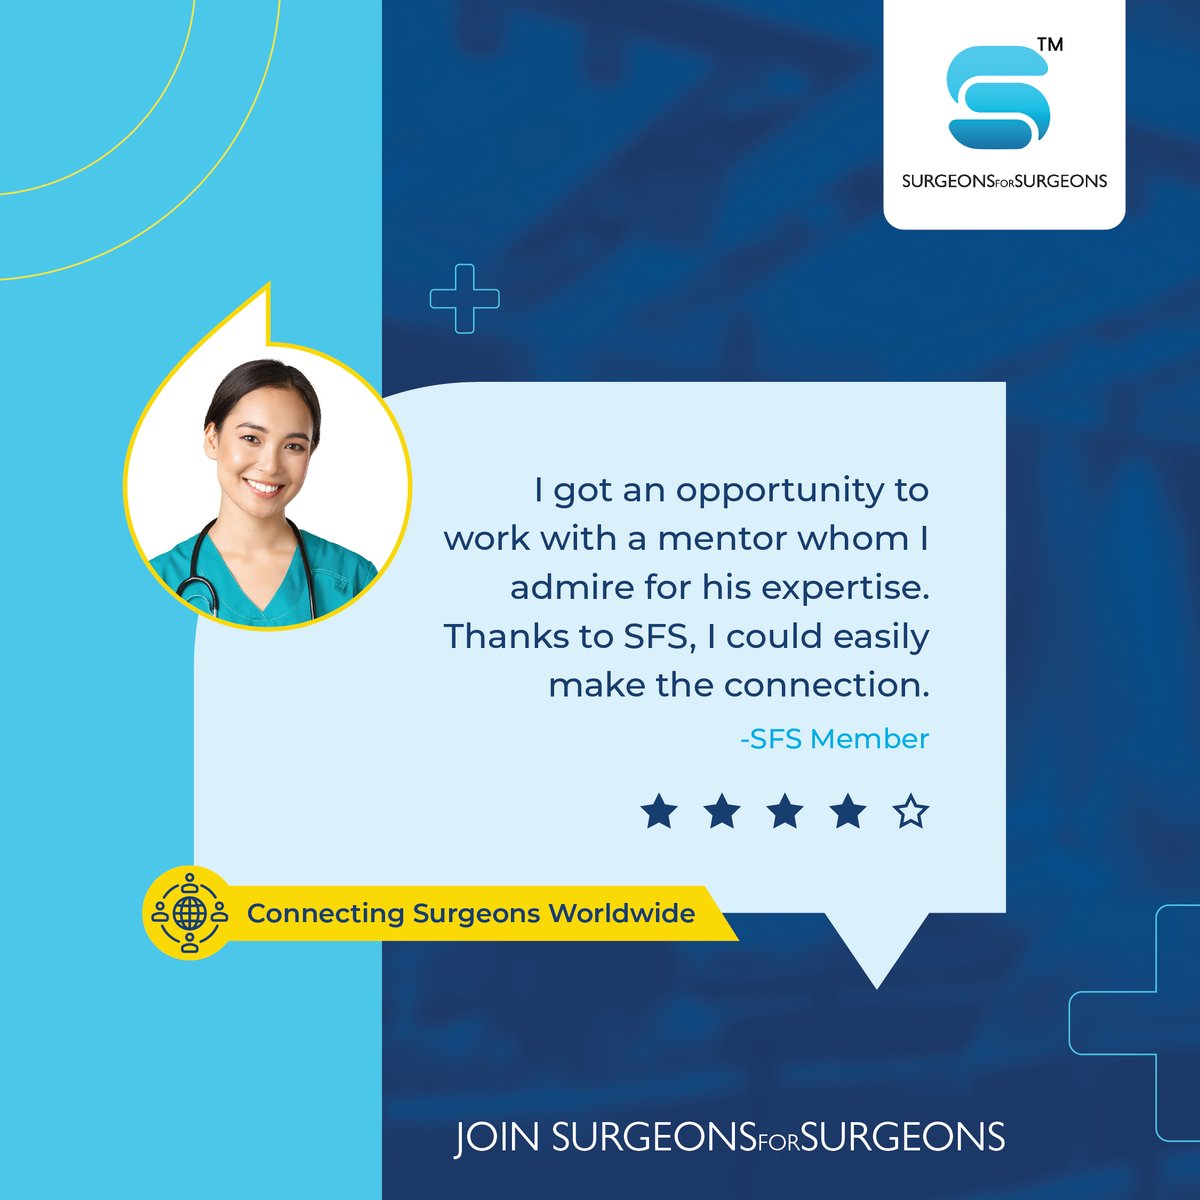 Join #Surgeonsforsurgeons network today and unlock possibilities 

Install app:
APP STORE: shorturl.at/afgS1
PLAY STORE: shorturl.at/auCV2 

#globalsurgicalnetwork #GlobalNetworking #SurgeonCommunity #GlobalSurgery #HealthcareNetworking